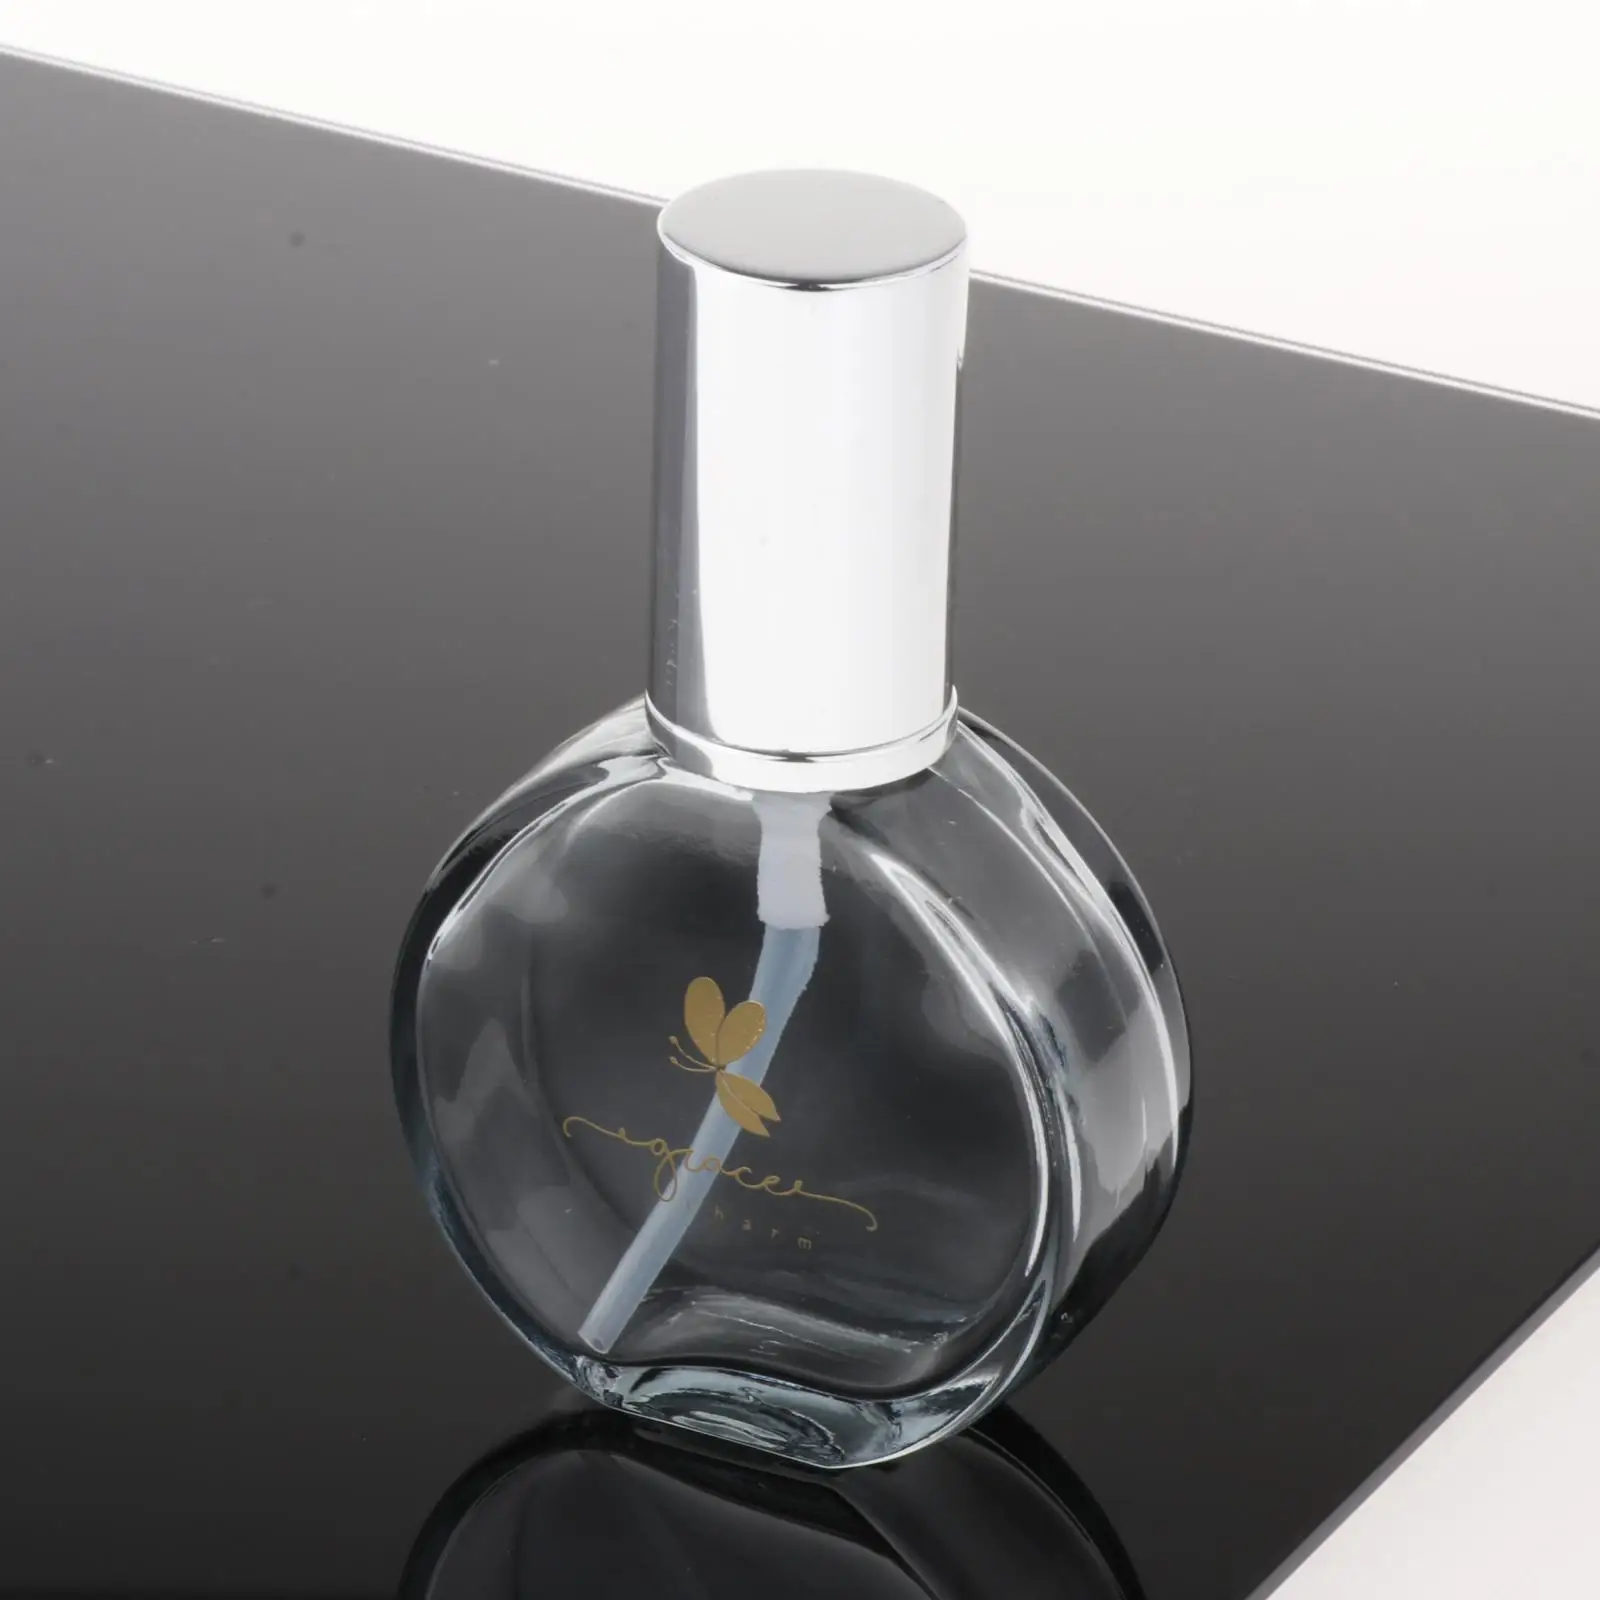 Portable 75ml 2.5OZ Empty Clear Glass Fine Mist Cosmetics Perfume Bottle Container Atomizer with Spray Applicator Car Decor